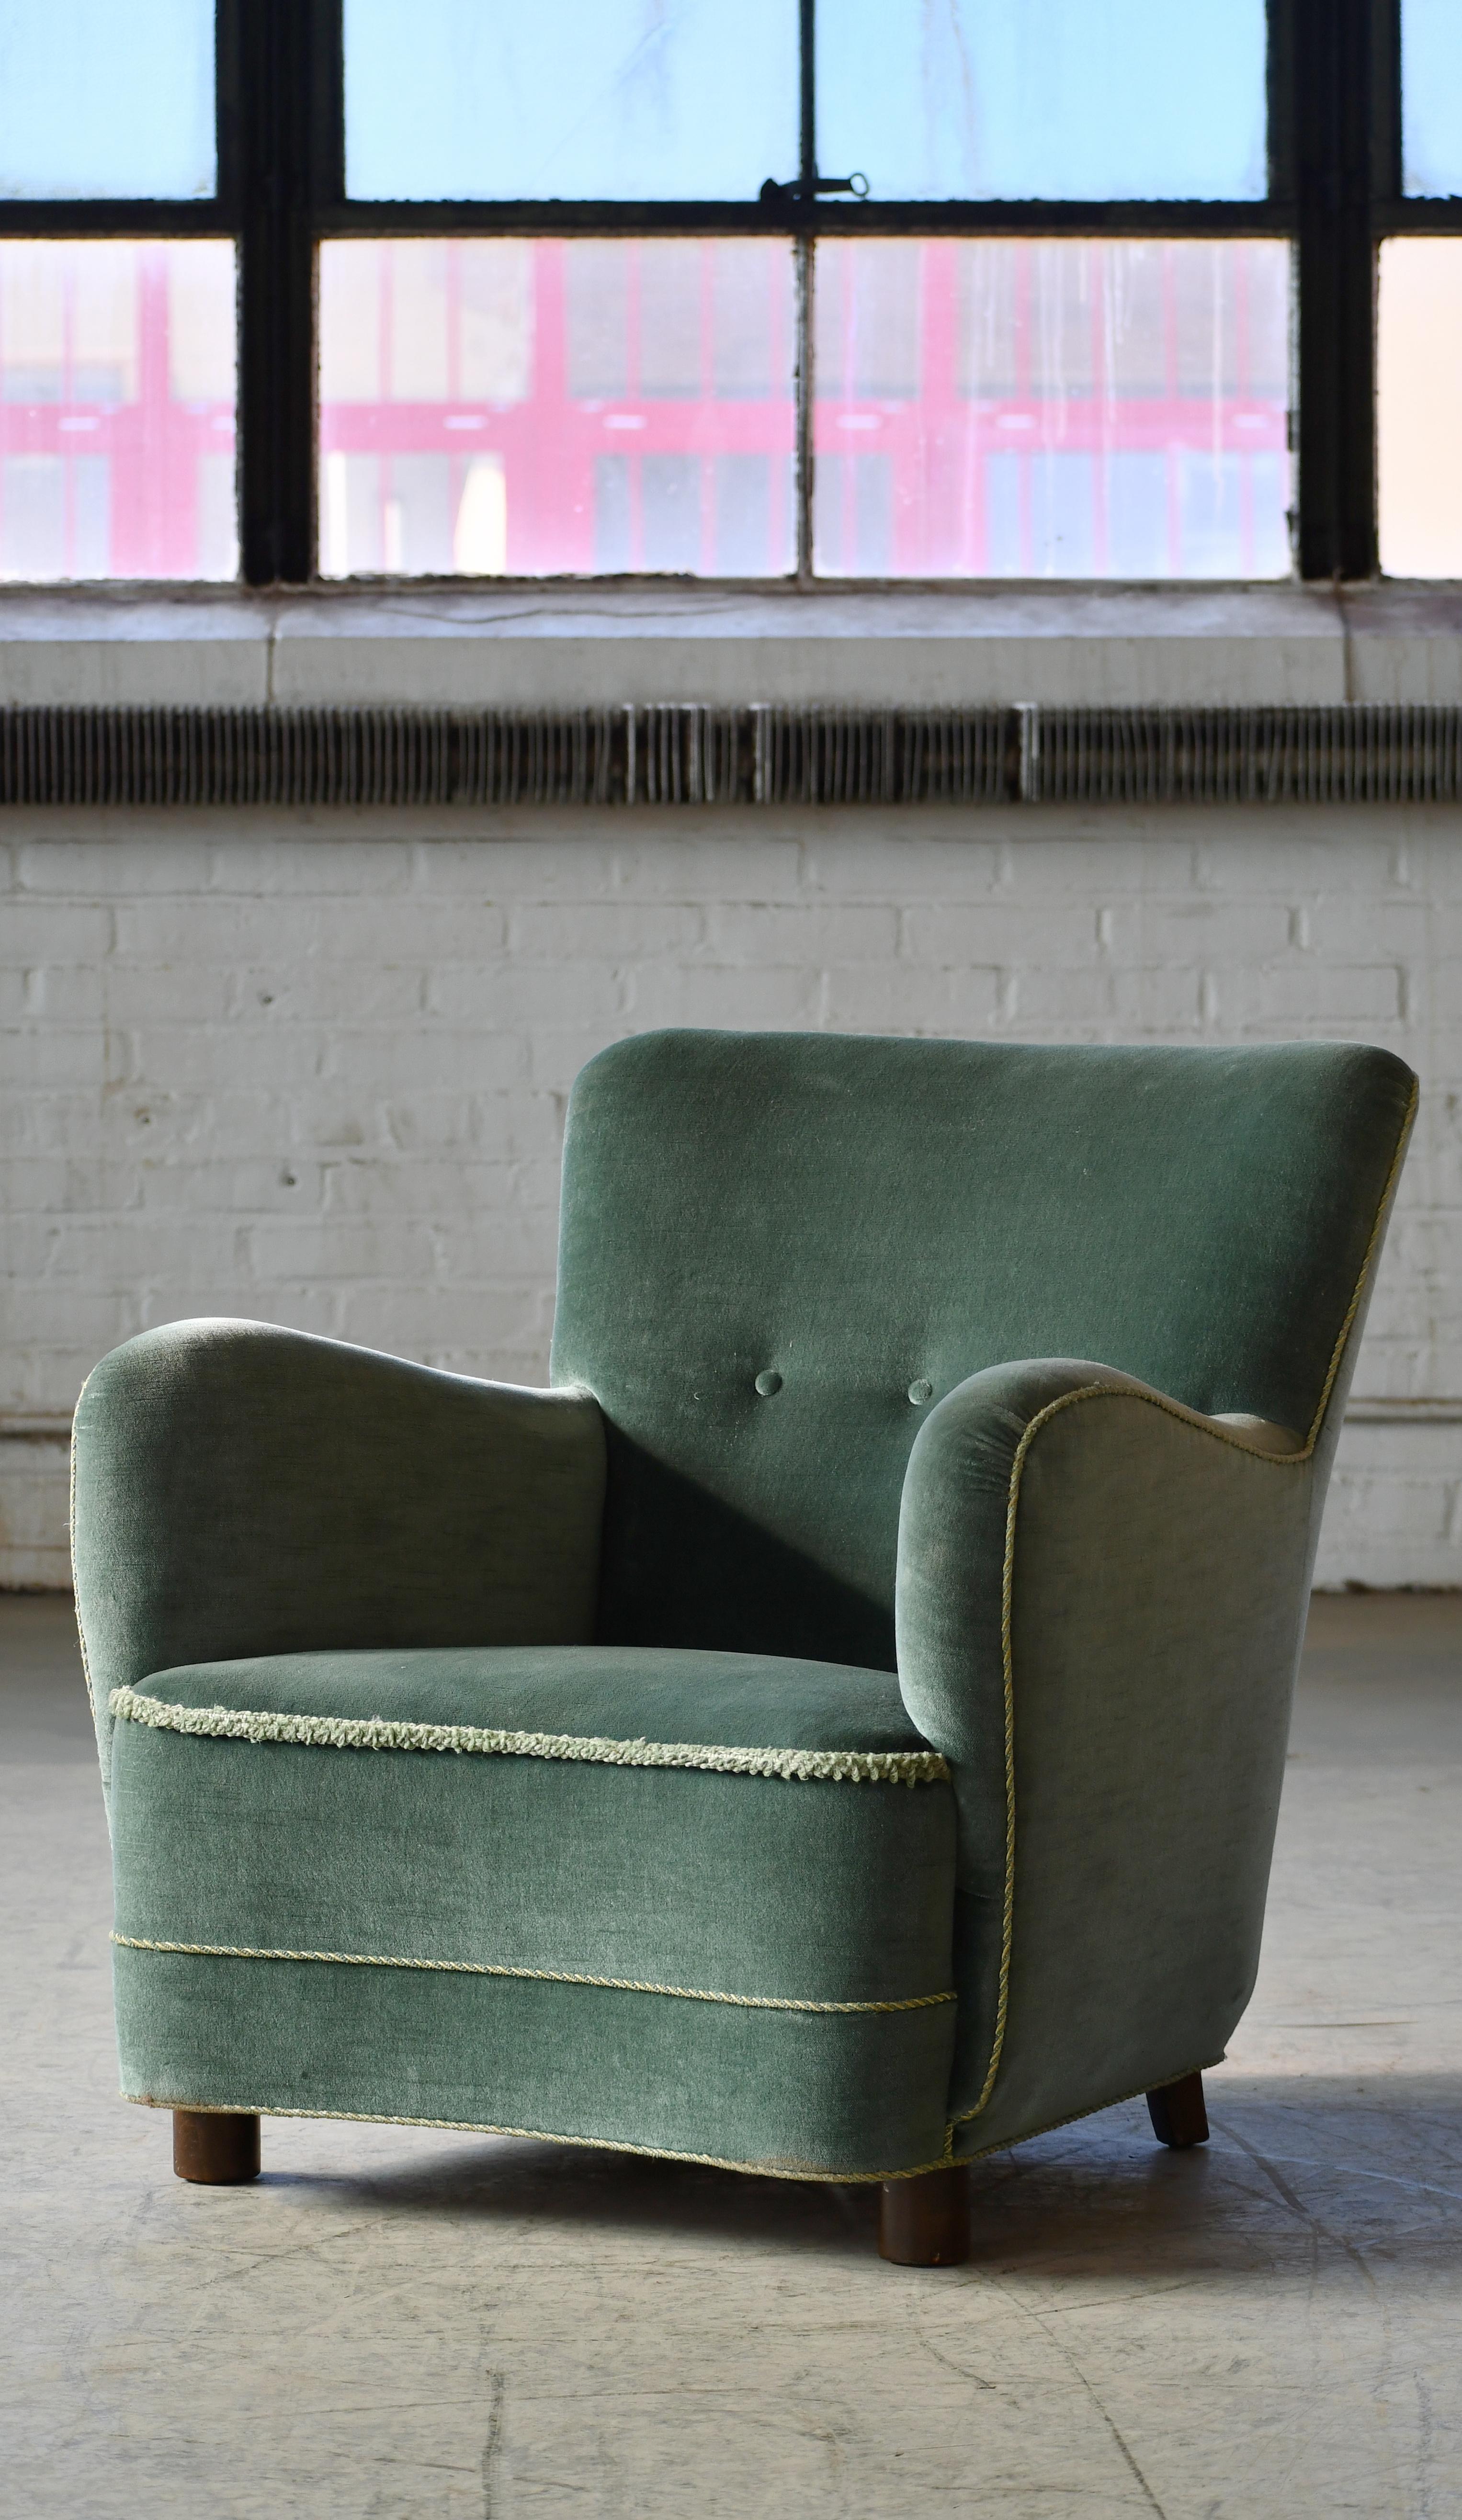 Beech Danish Art Deco or Early Midcentury Lounge Chair in Green Mohair 1930-40s